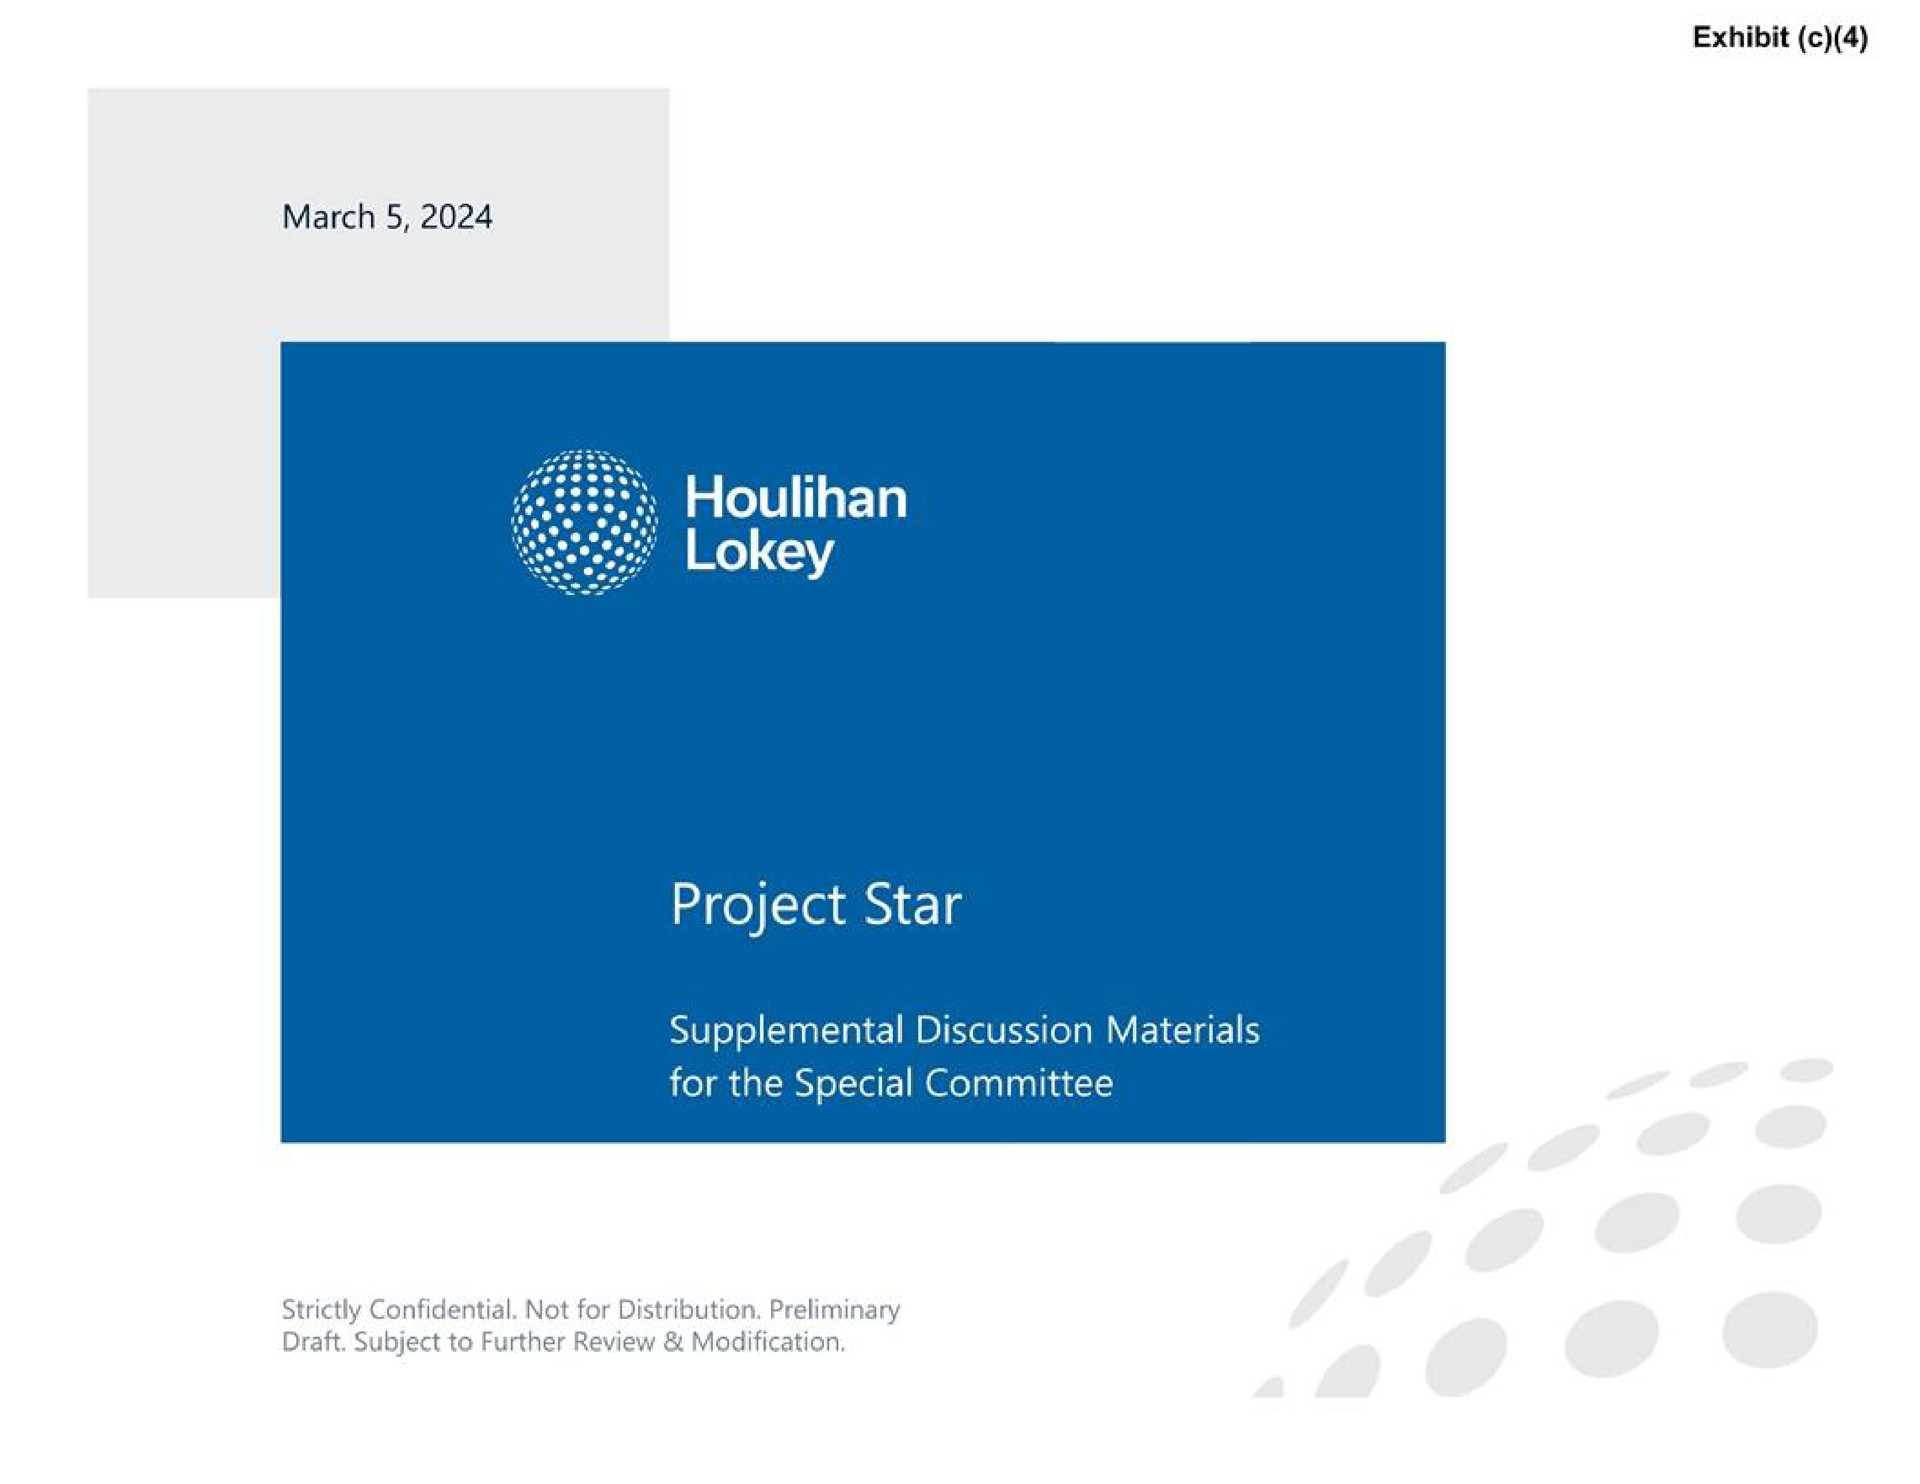 project star supplemental discussion materials for the special committee | Houlihan Lokey